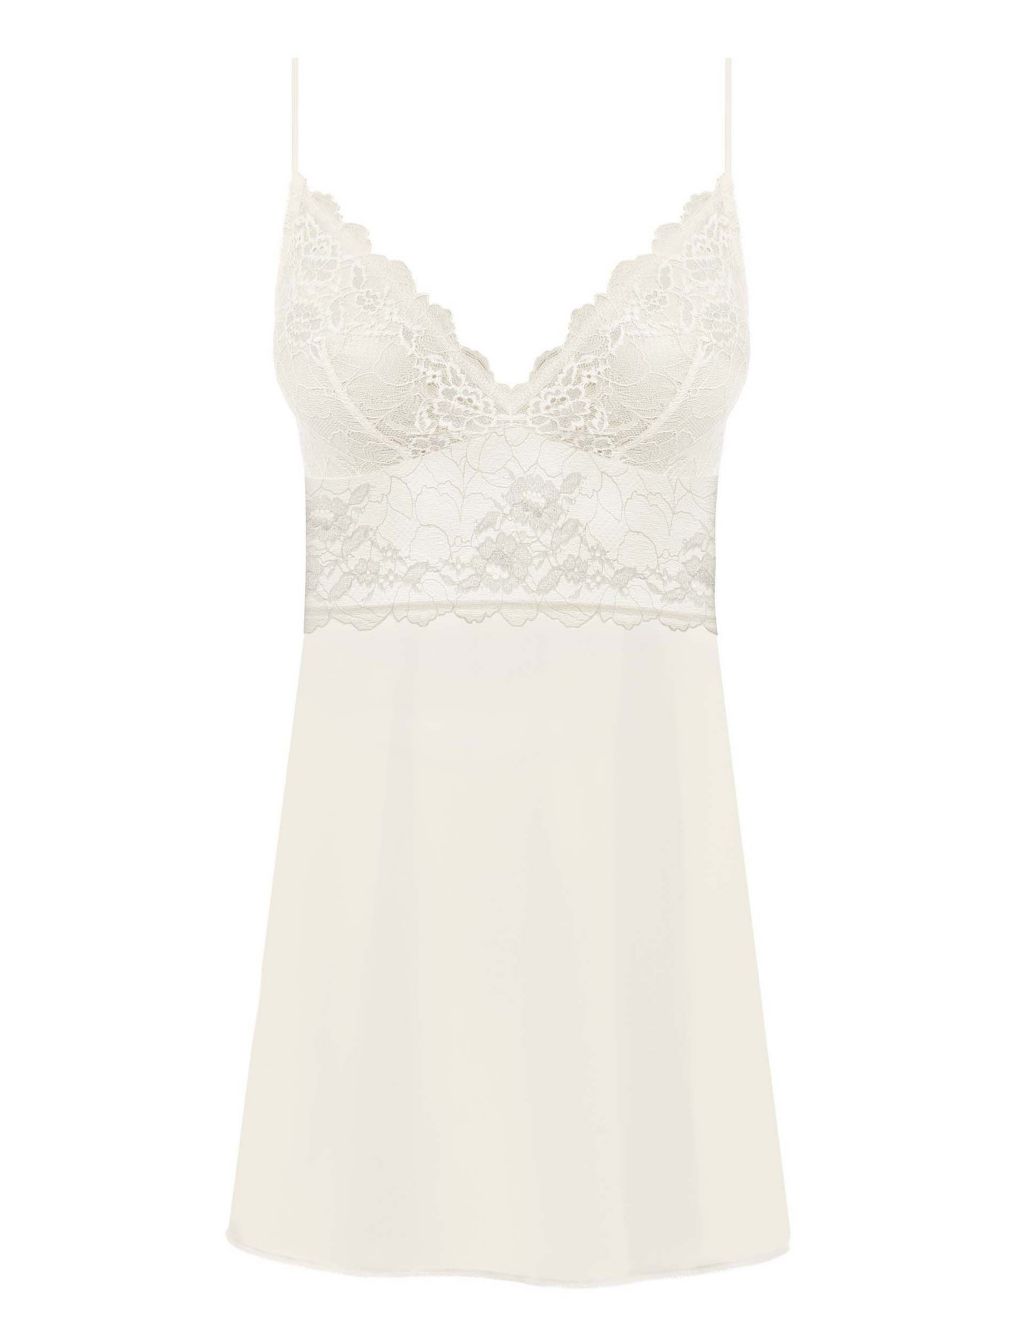 Lace Perfection Chemise | Wacoal | M&S